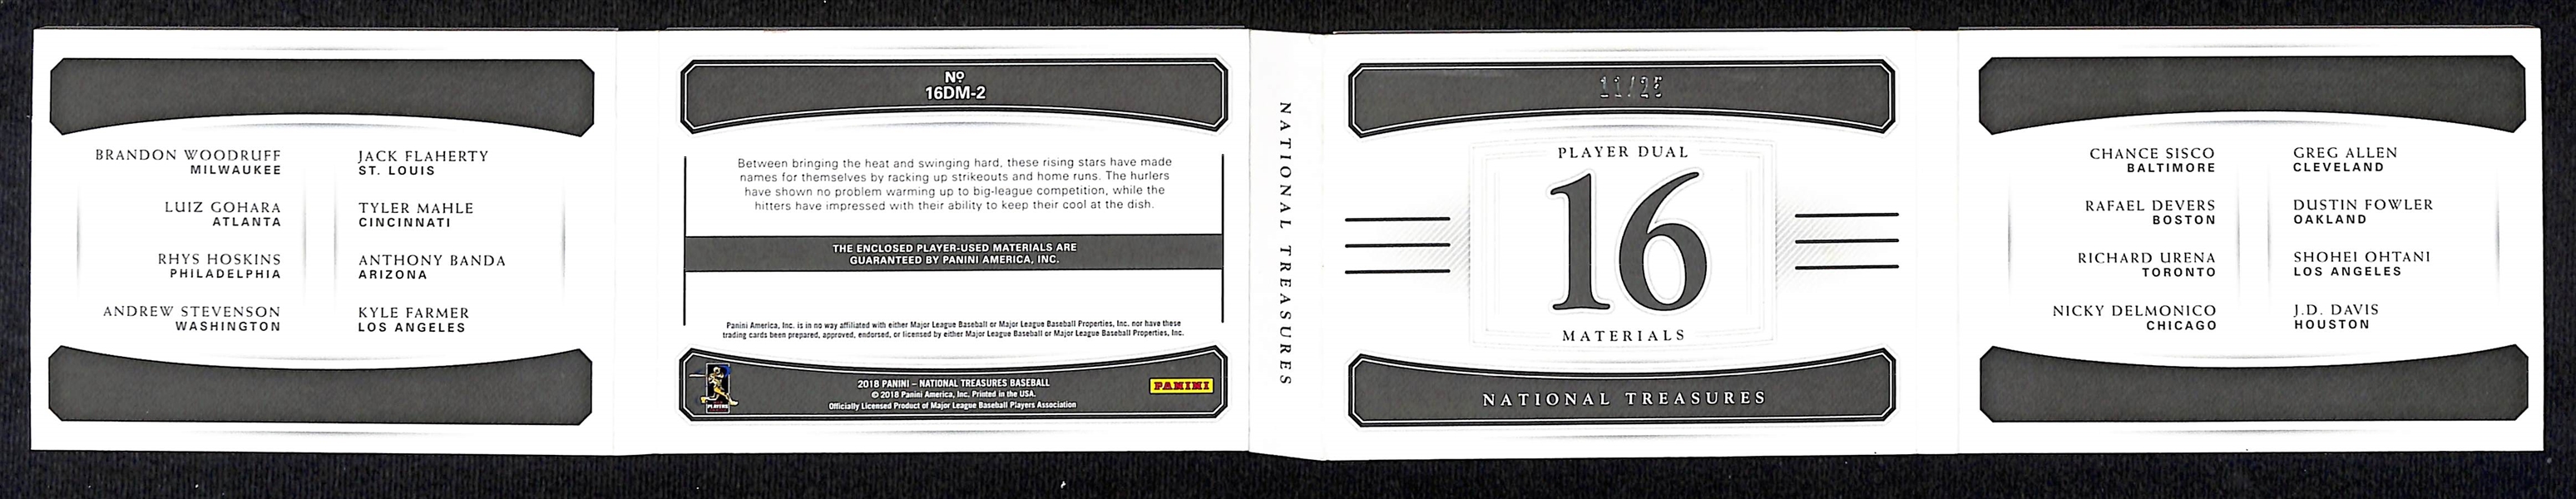 2018 National Treasures Baseball 16 Player Dual Game Used Materials Card w. Ohtani, Devers, Davis and Many More!